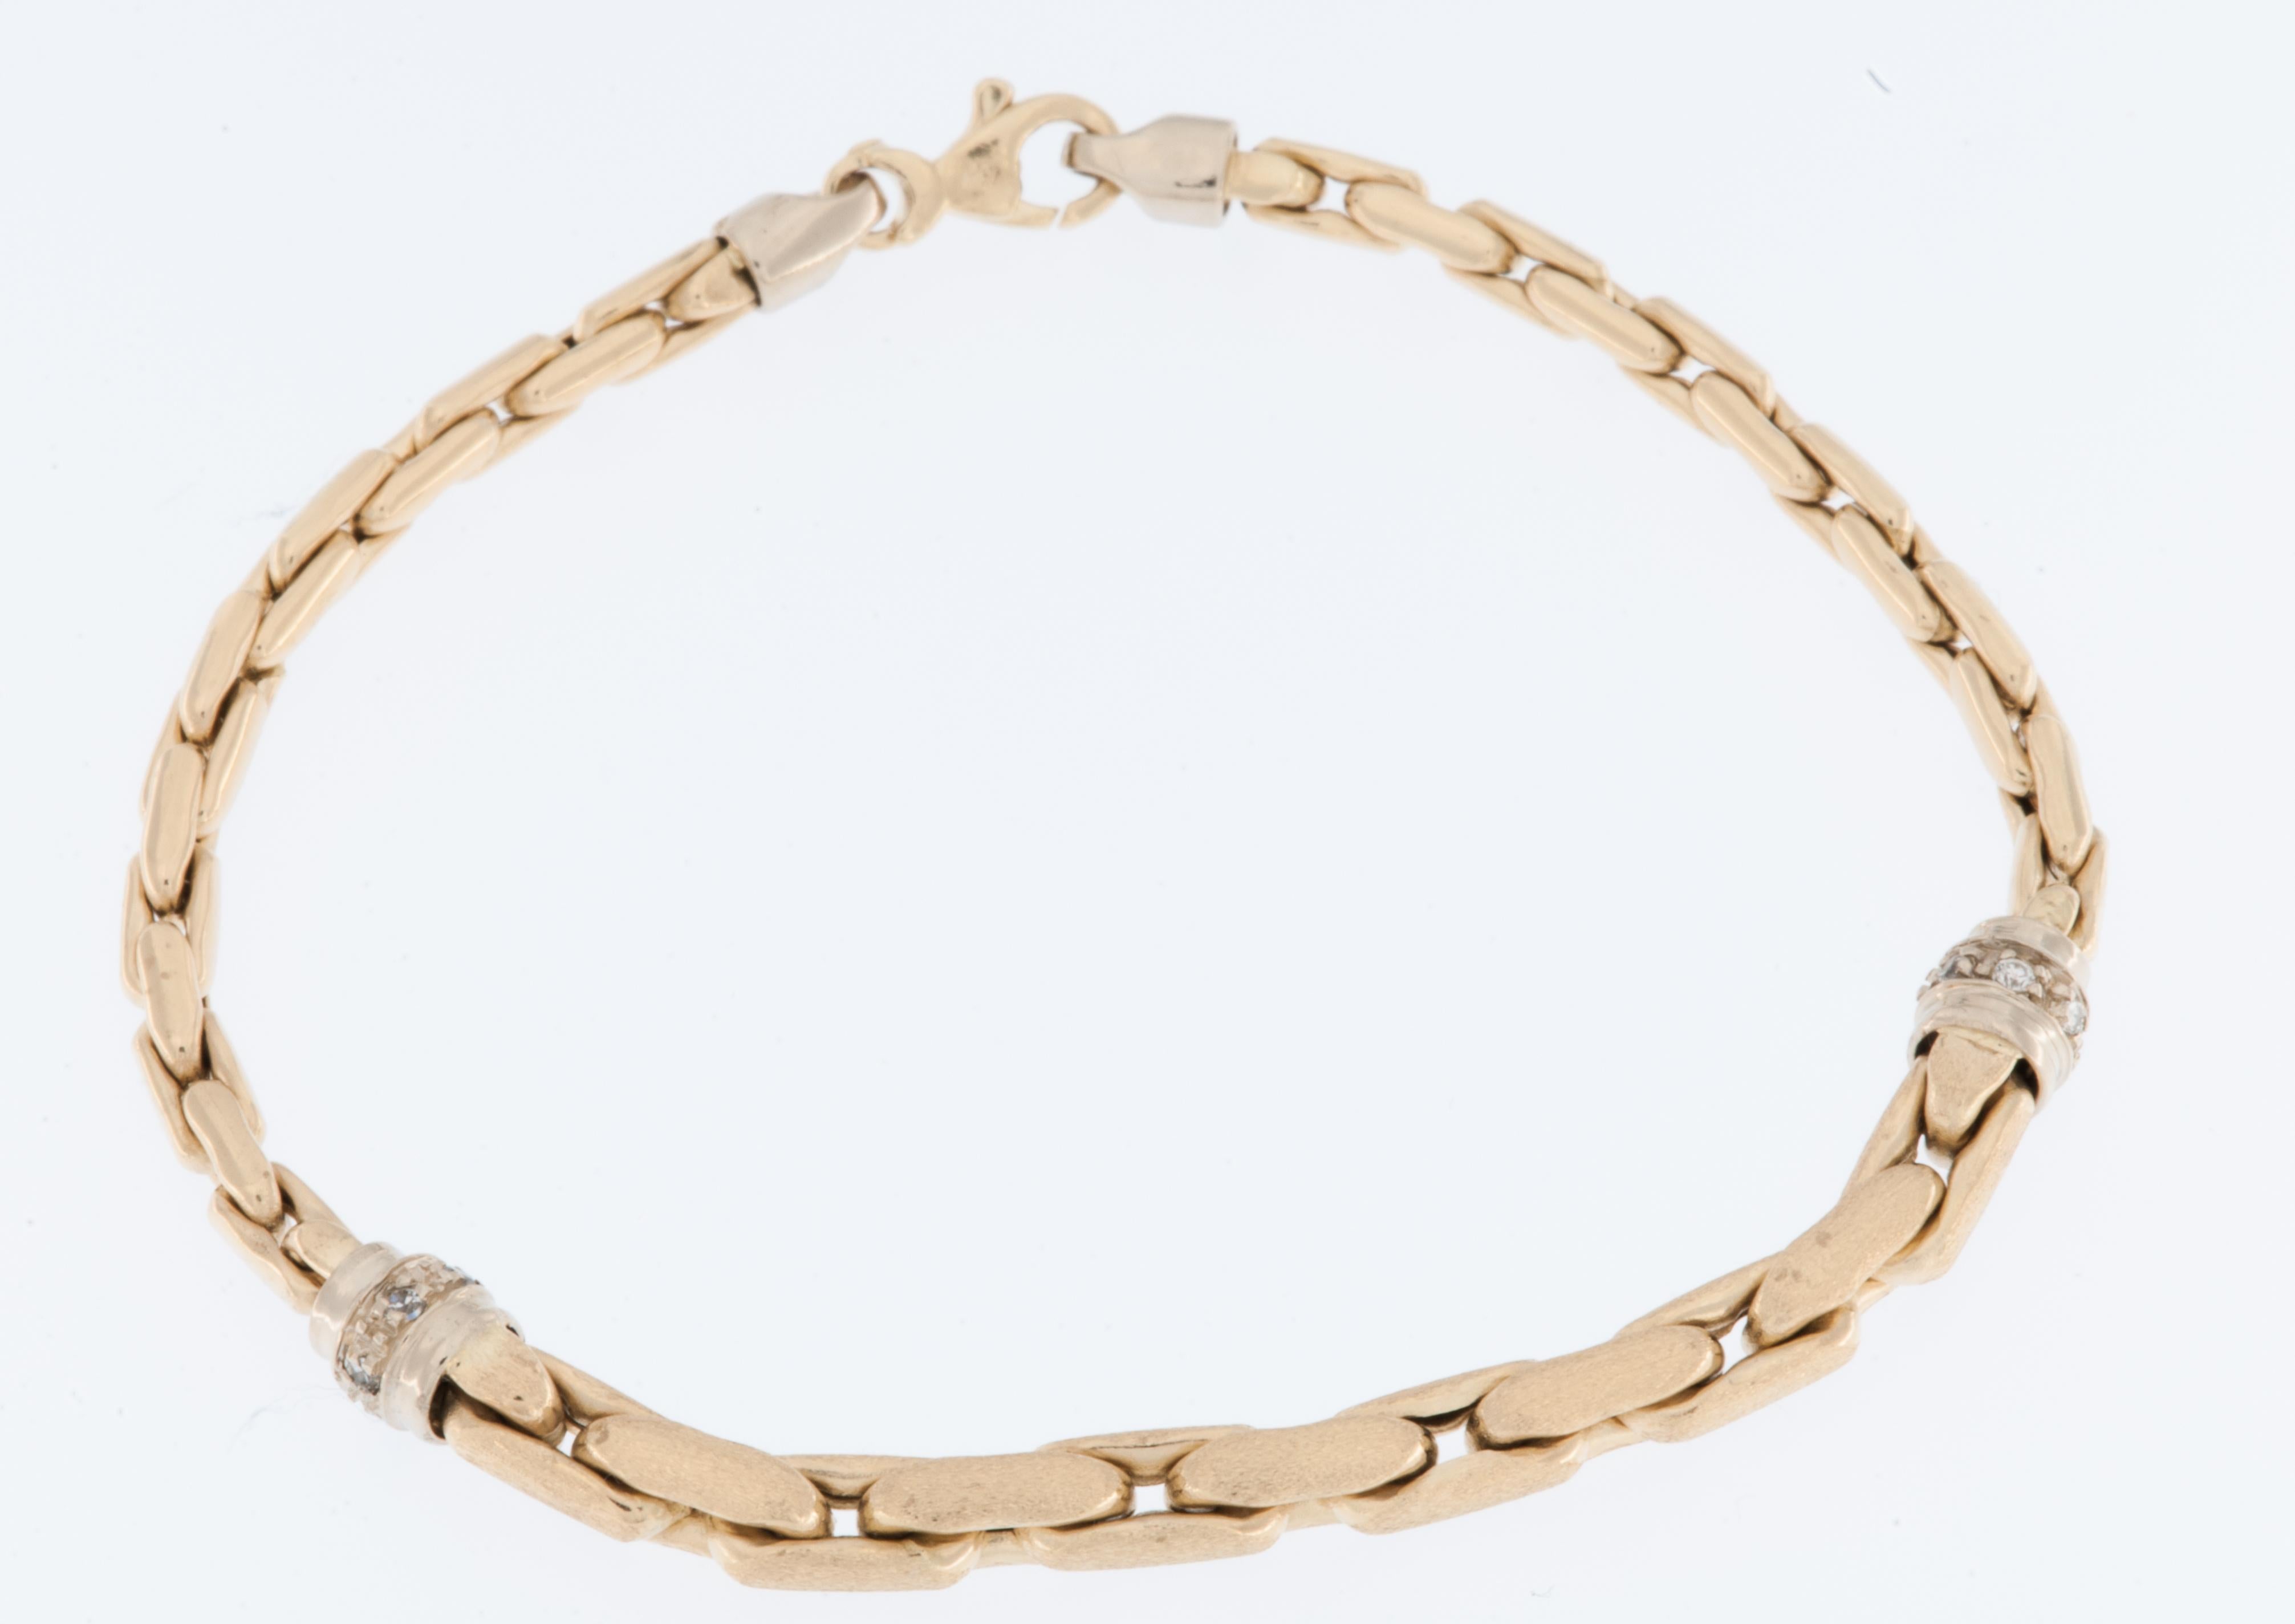 The Vintage German 14kt Yellow and White Gold Bracelet with Diamonds is a piece of fine jewelry that reflects both the craftsmanship of the era it was created in and the timeless beauty of diamonds. 

The bracelet is crafted from a combination of